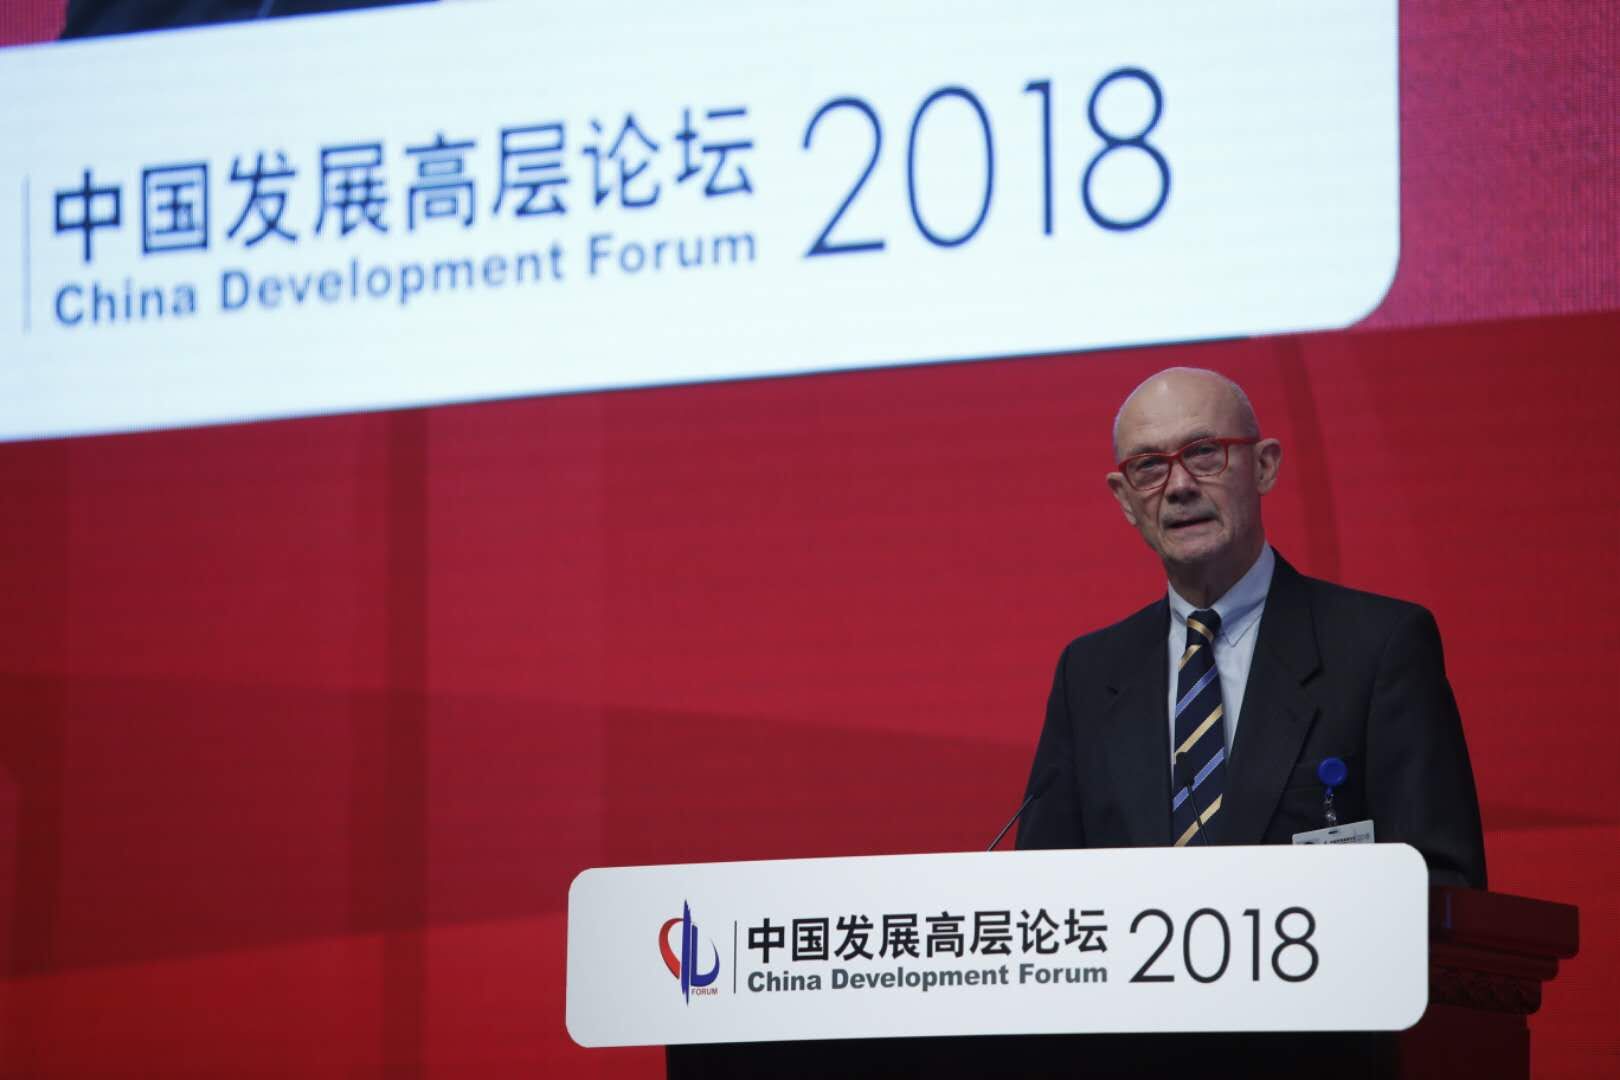 Former WTO Secretary-General Pascal Lamy, speaks at the Economic Summit of the annual China Development Forum in Beijing on March 24, 2018. [Photo by Yang Jia / China.org.cn]